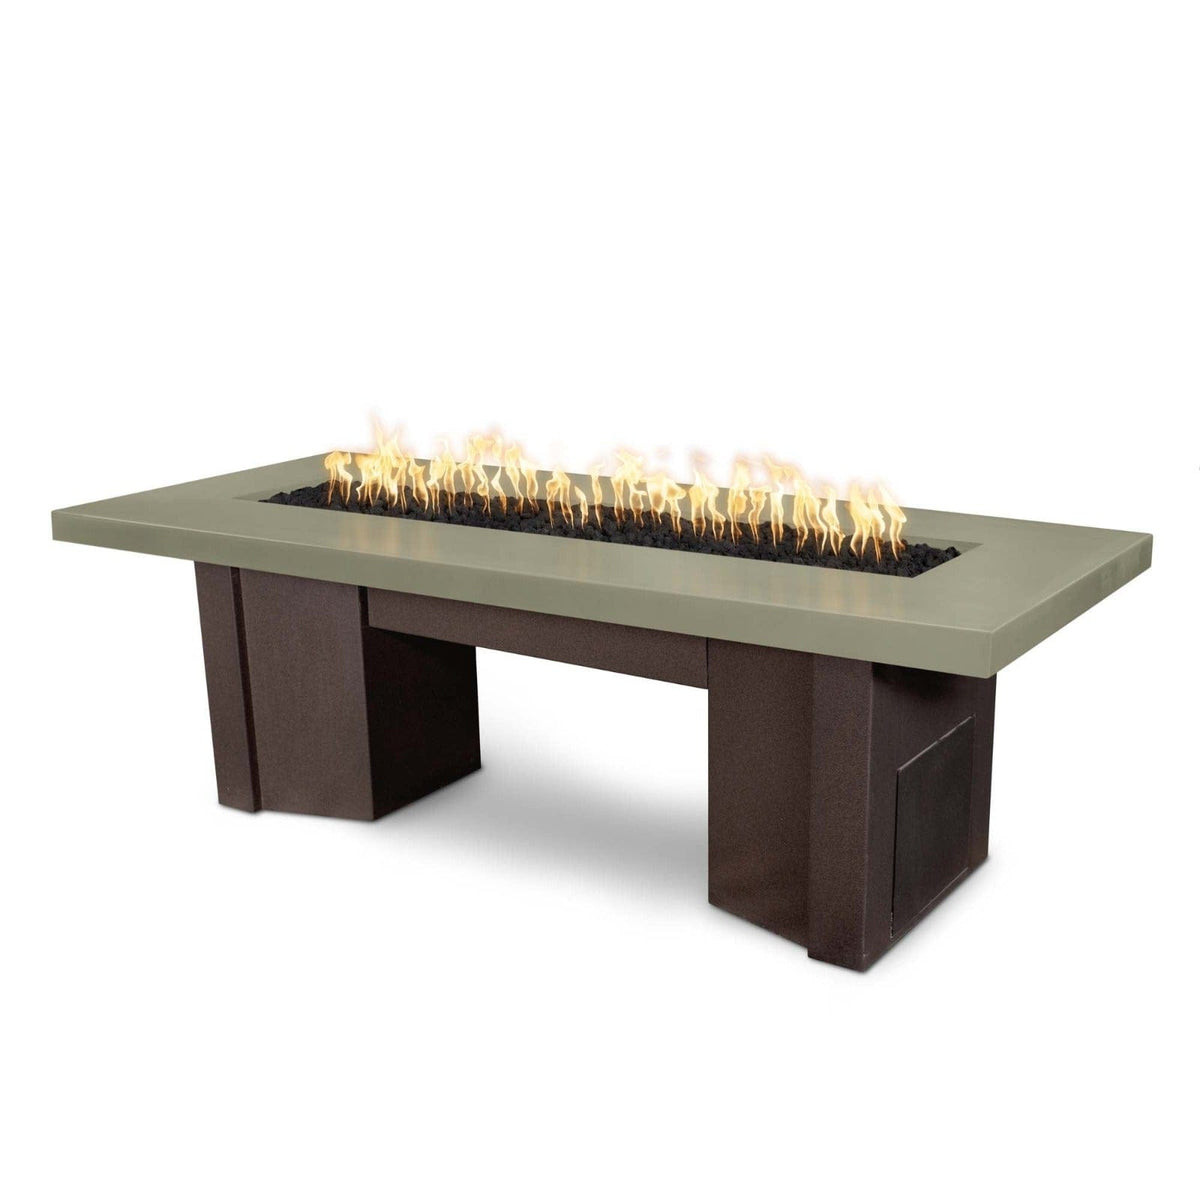 The Outdoor Plus Fire Features Ash (-ASH) / Java Powder Coated Steel (-JAV) The Outdoor Plus 78&quot; Alameda Fire Table Smooth Concrete in Liquid Propane - Flame Sense System with Push Button Spark Igniter / OPT-ALMGFRC78FSEN-LP